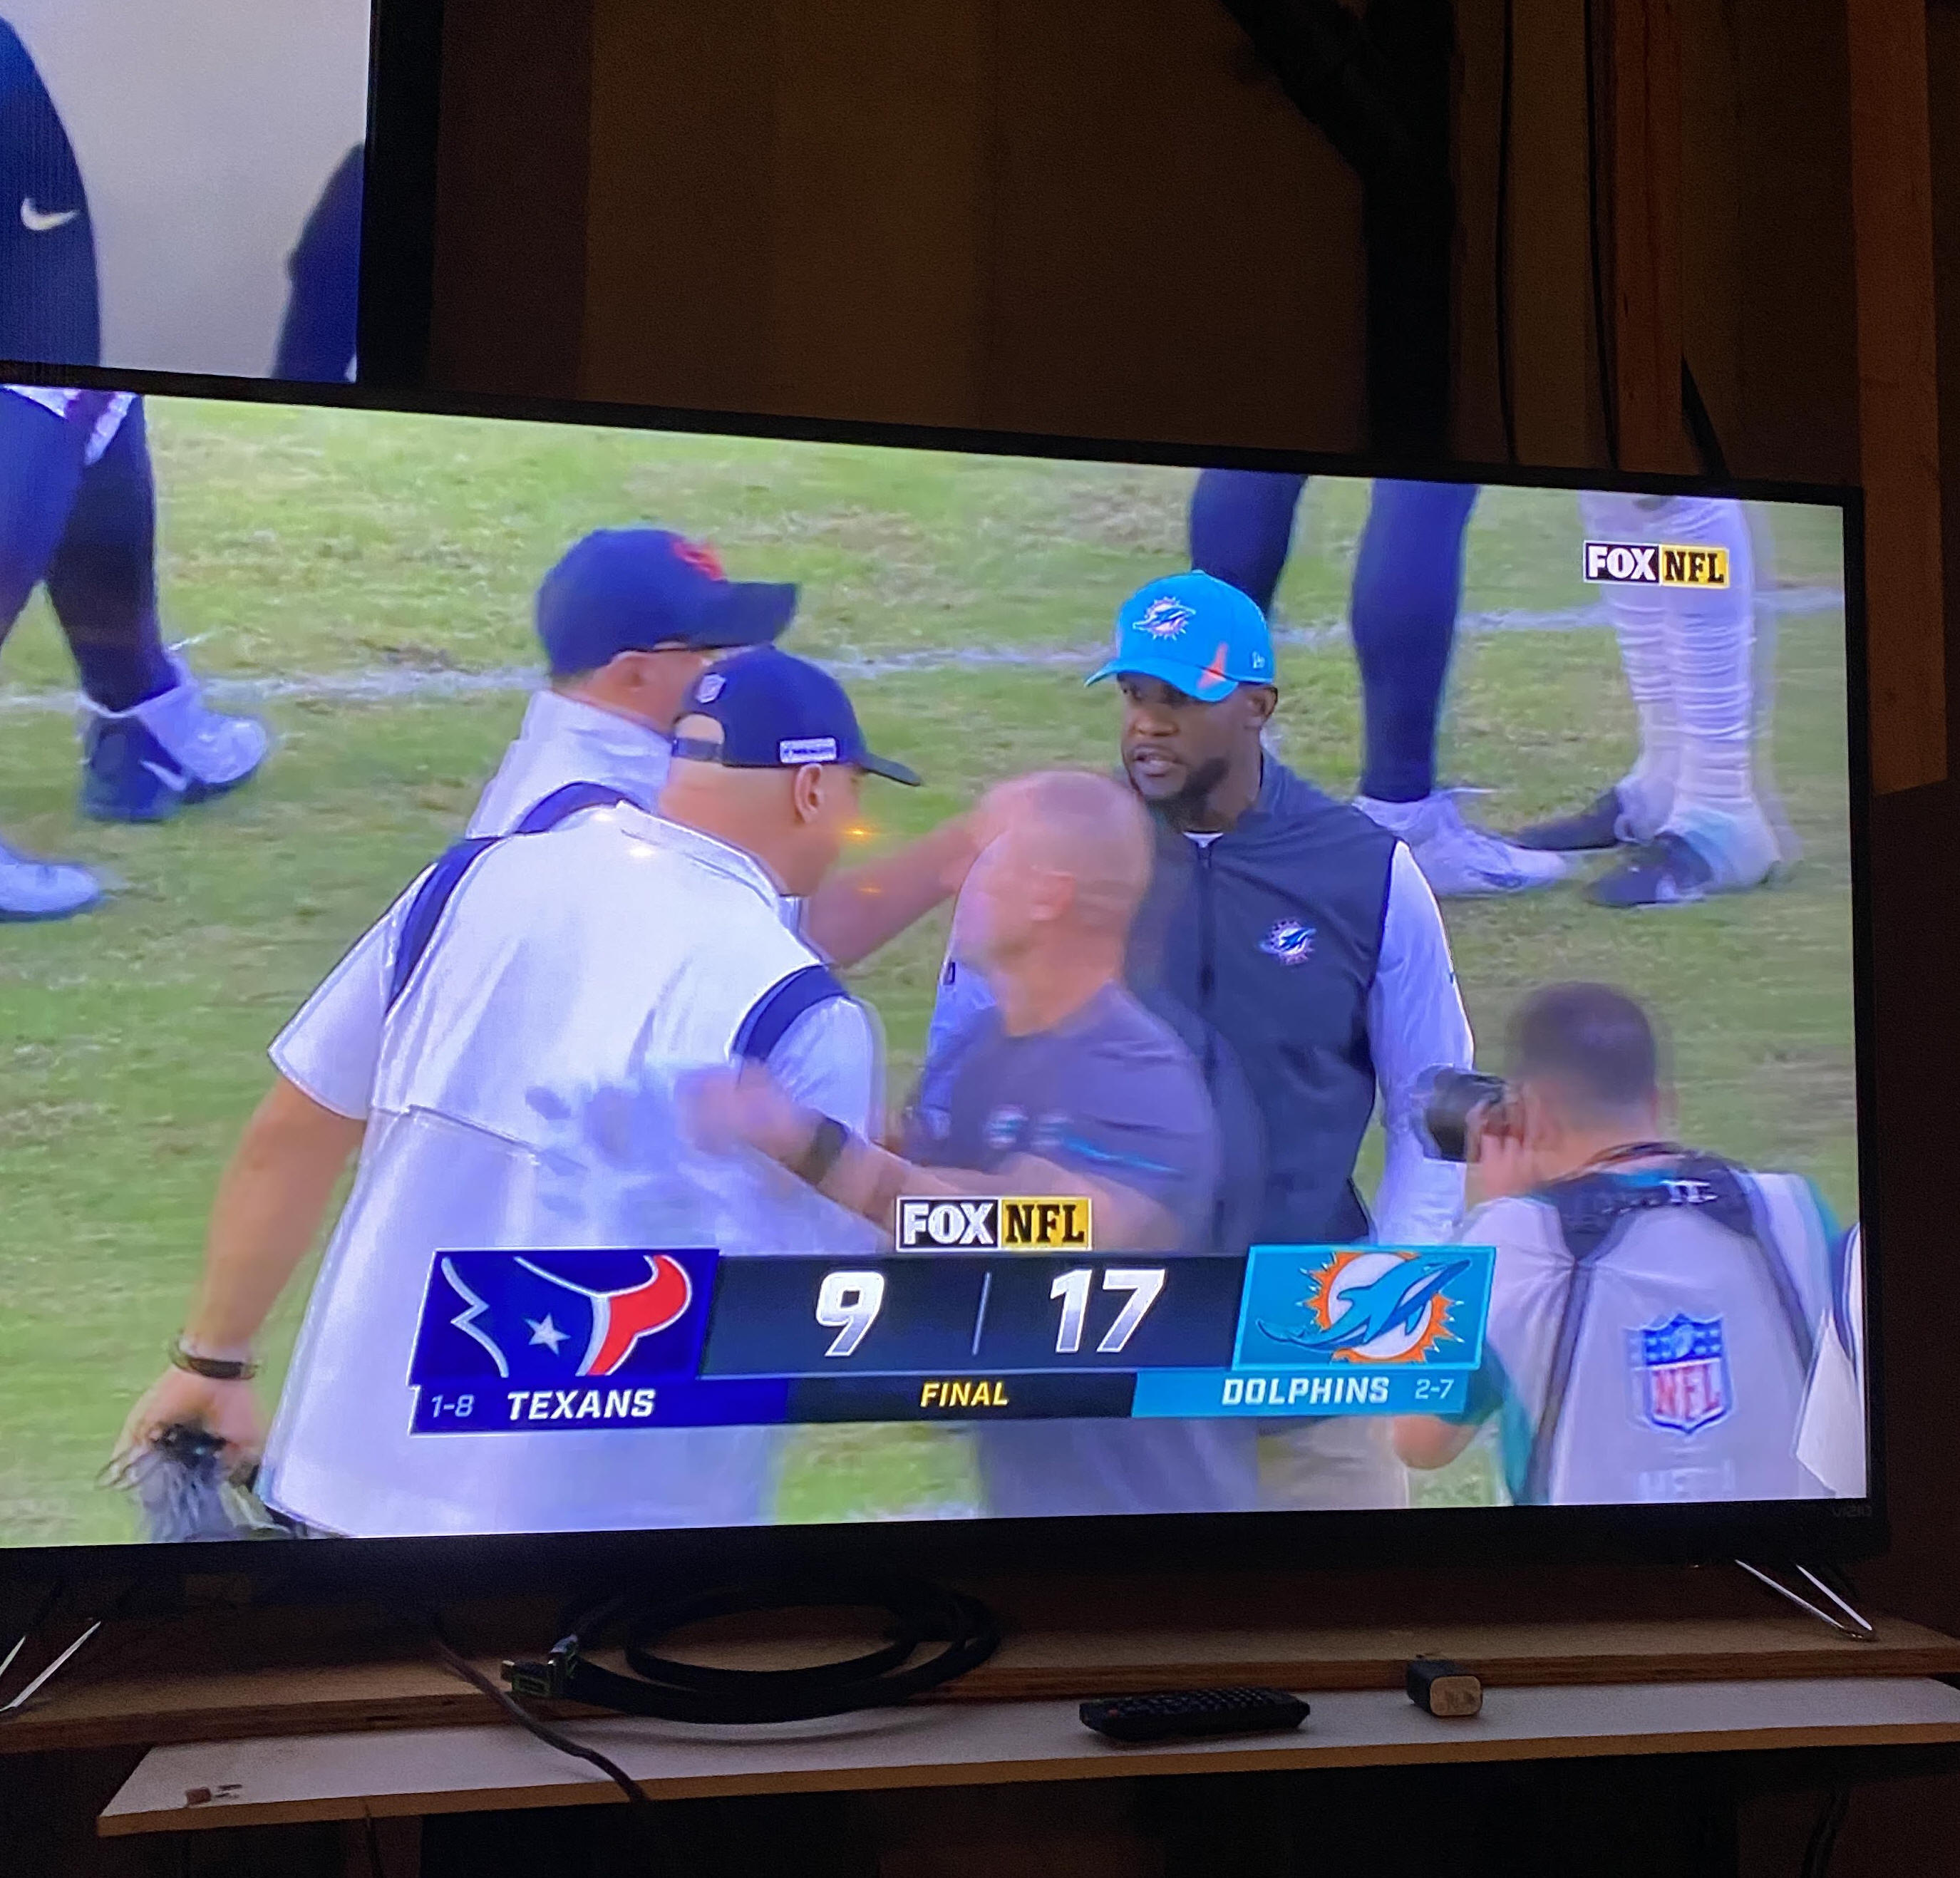 11-7-21 FINS 17, Texans 9-watched at DP's